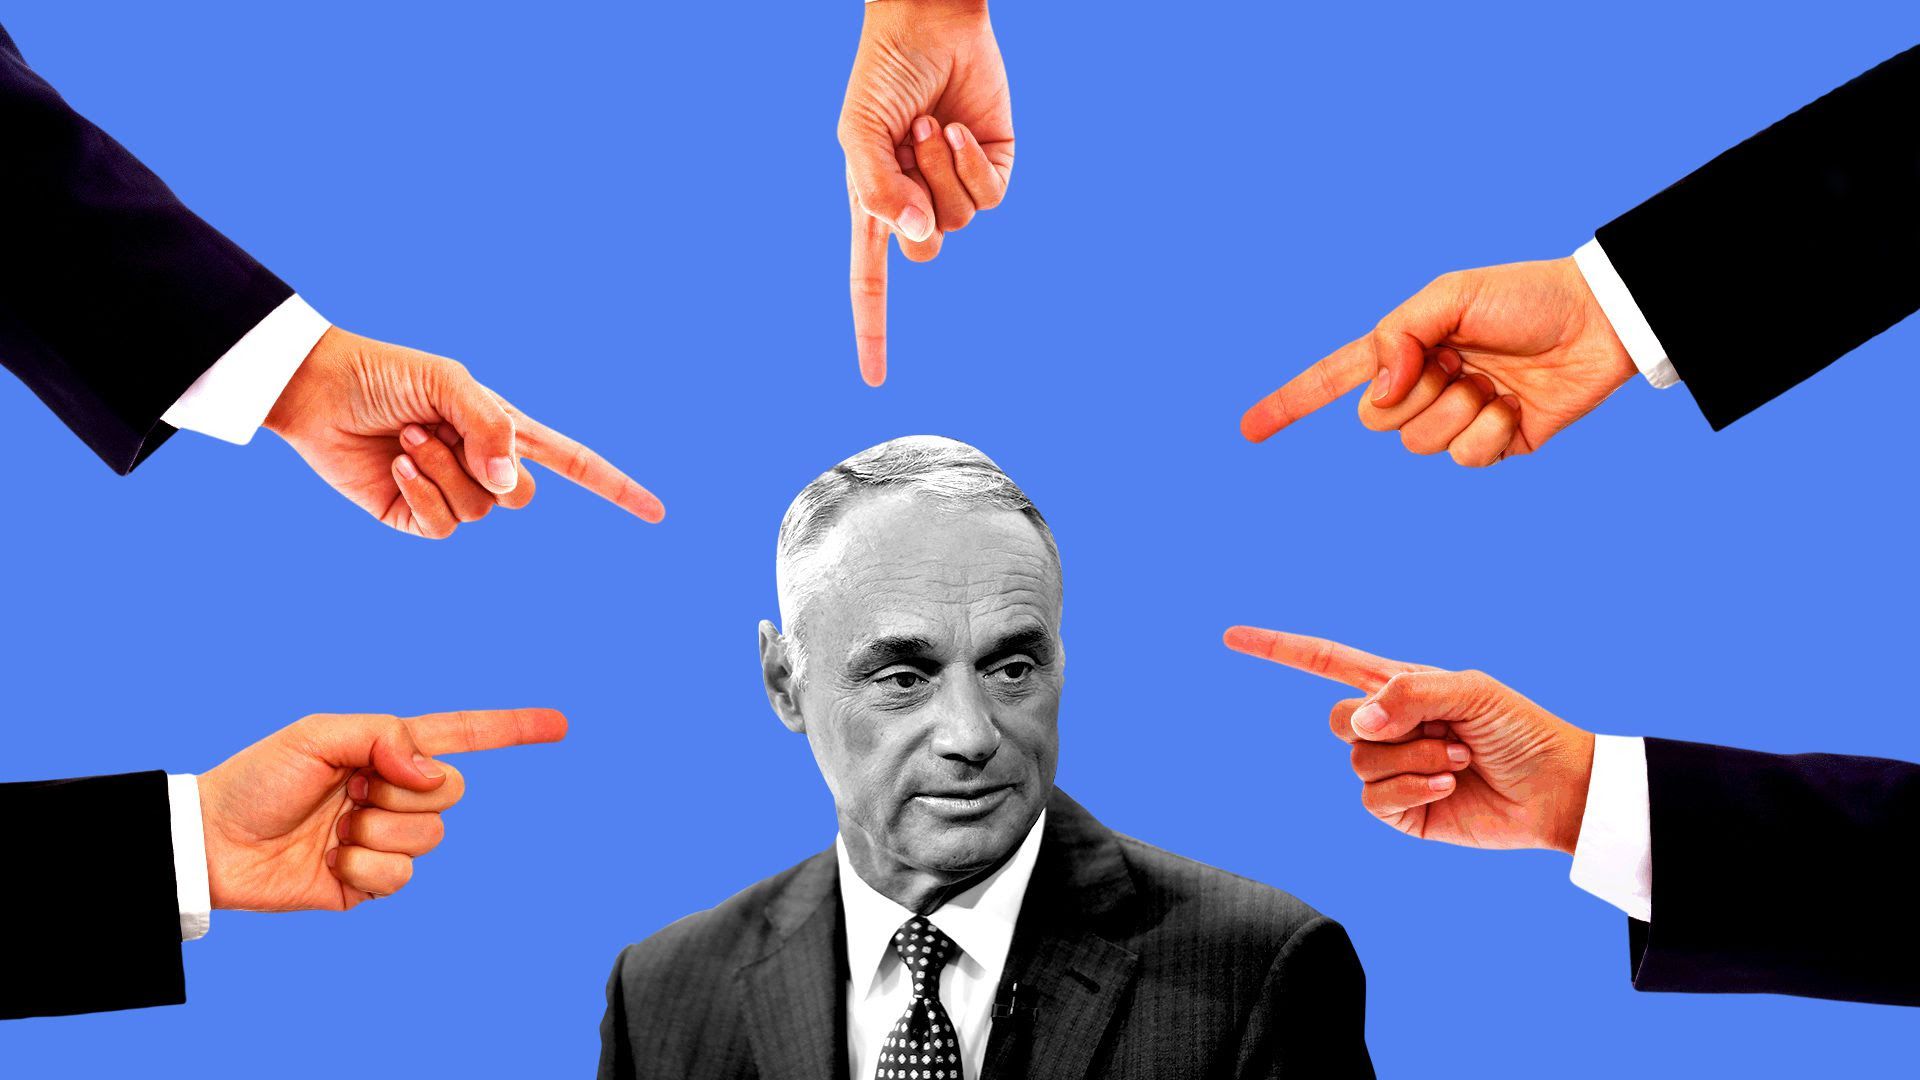 MLB commissioner Rob Manfred surrounded by pointing fingers